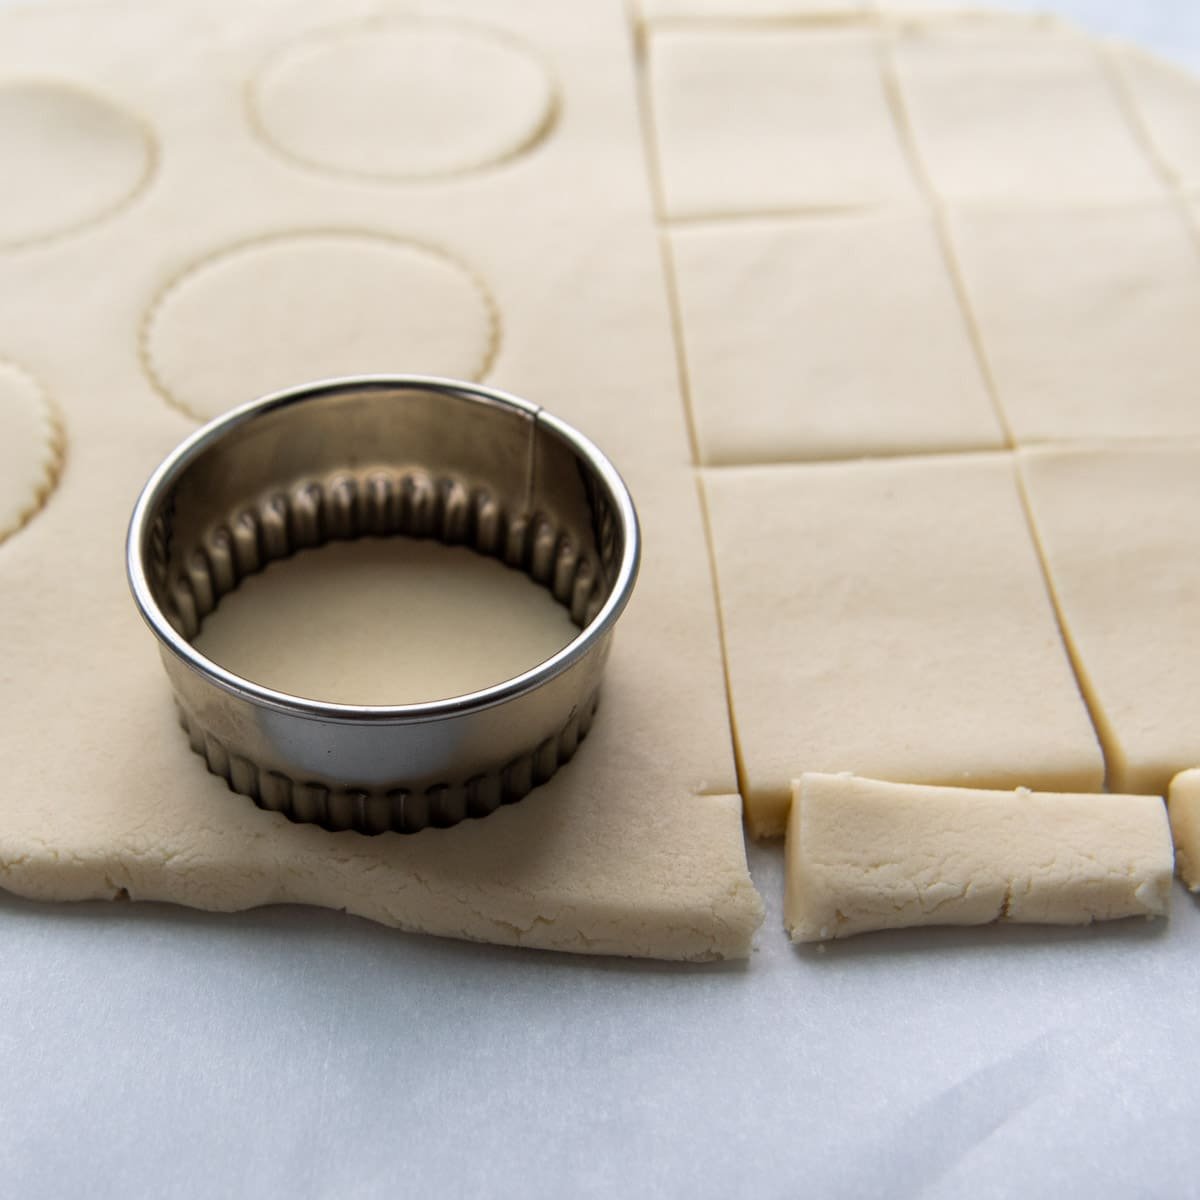 biscuit cutter cutting into rolled out dough.